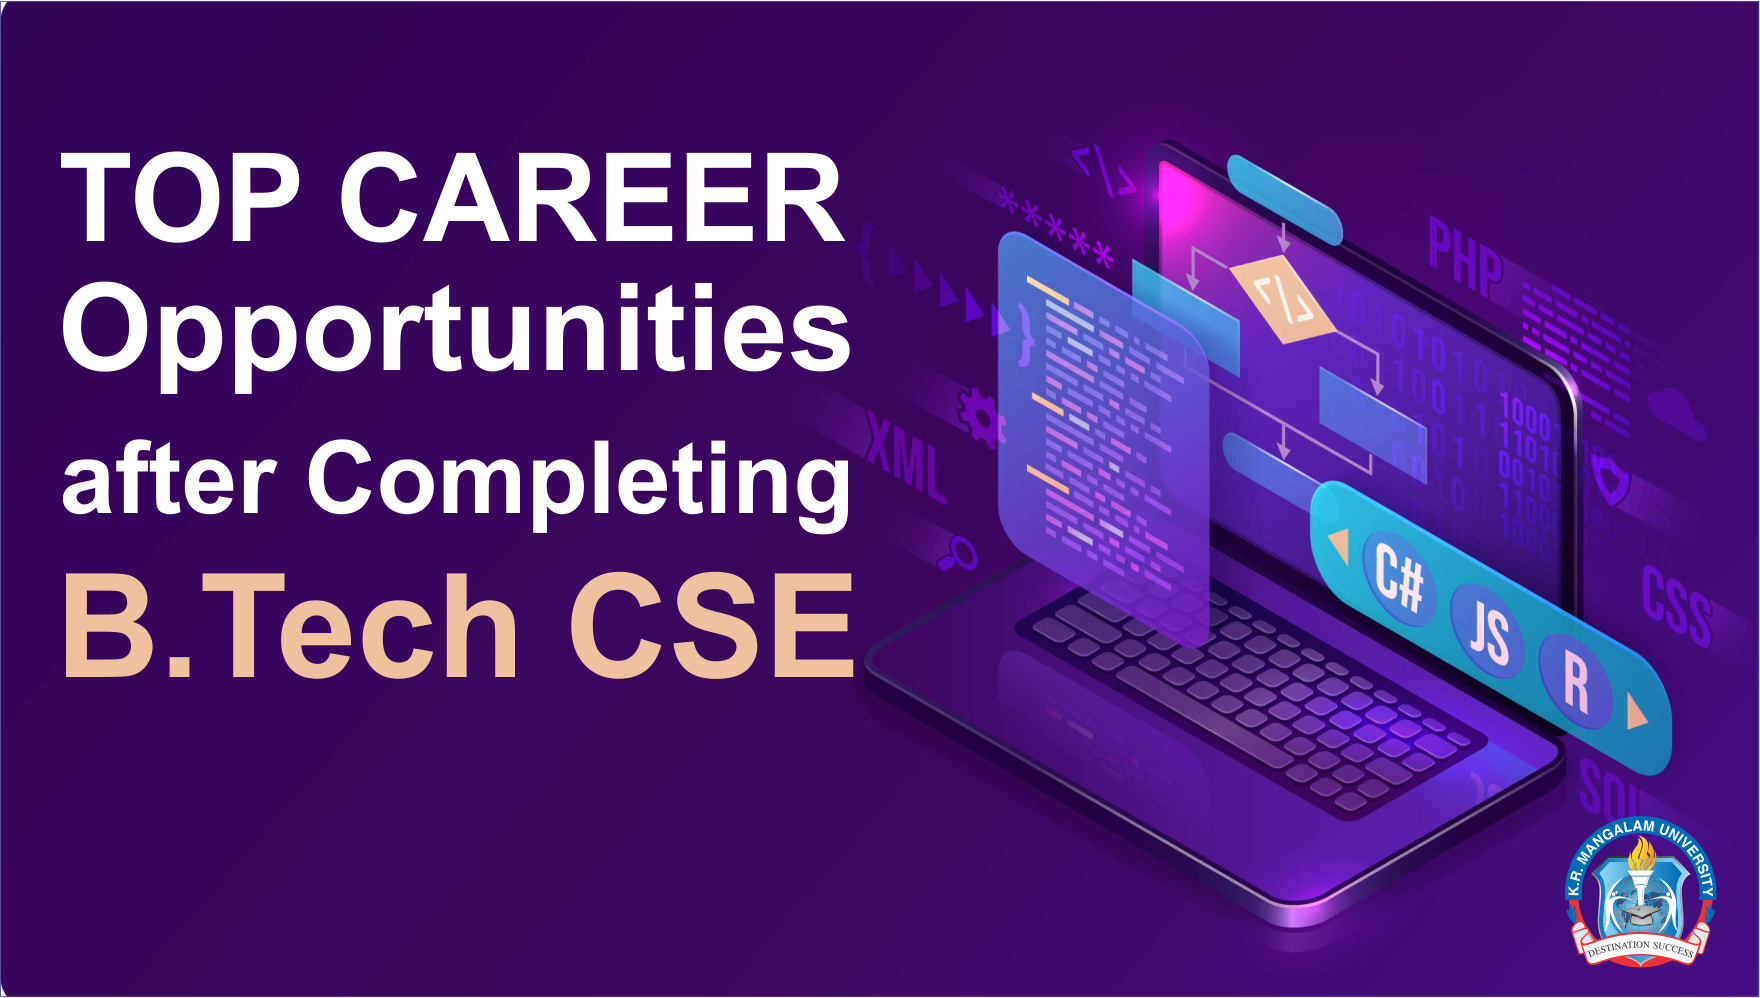 Top Career Opportunities after Completing B.Tech CSE